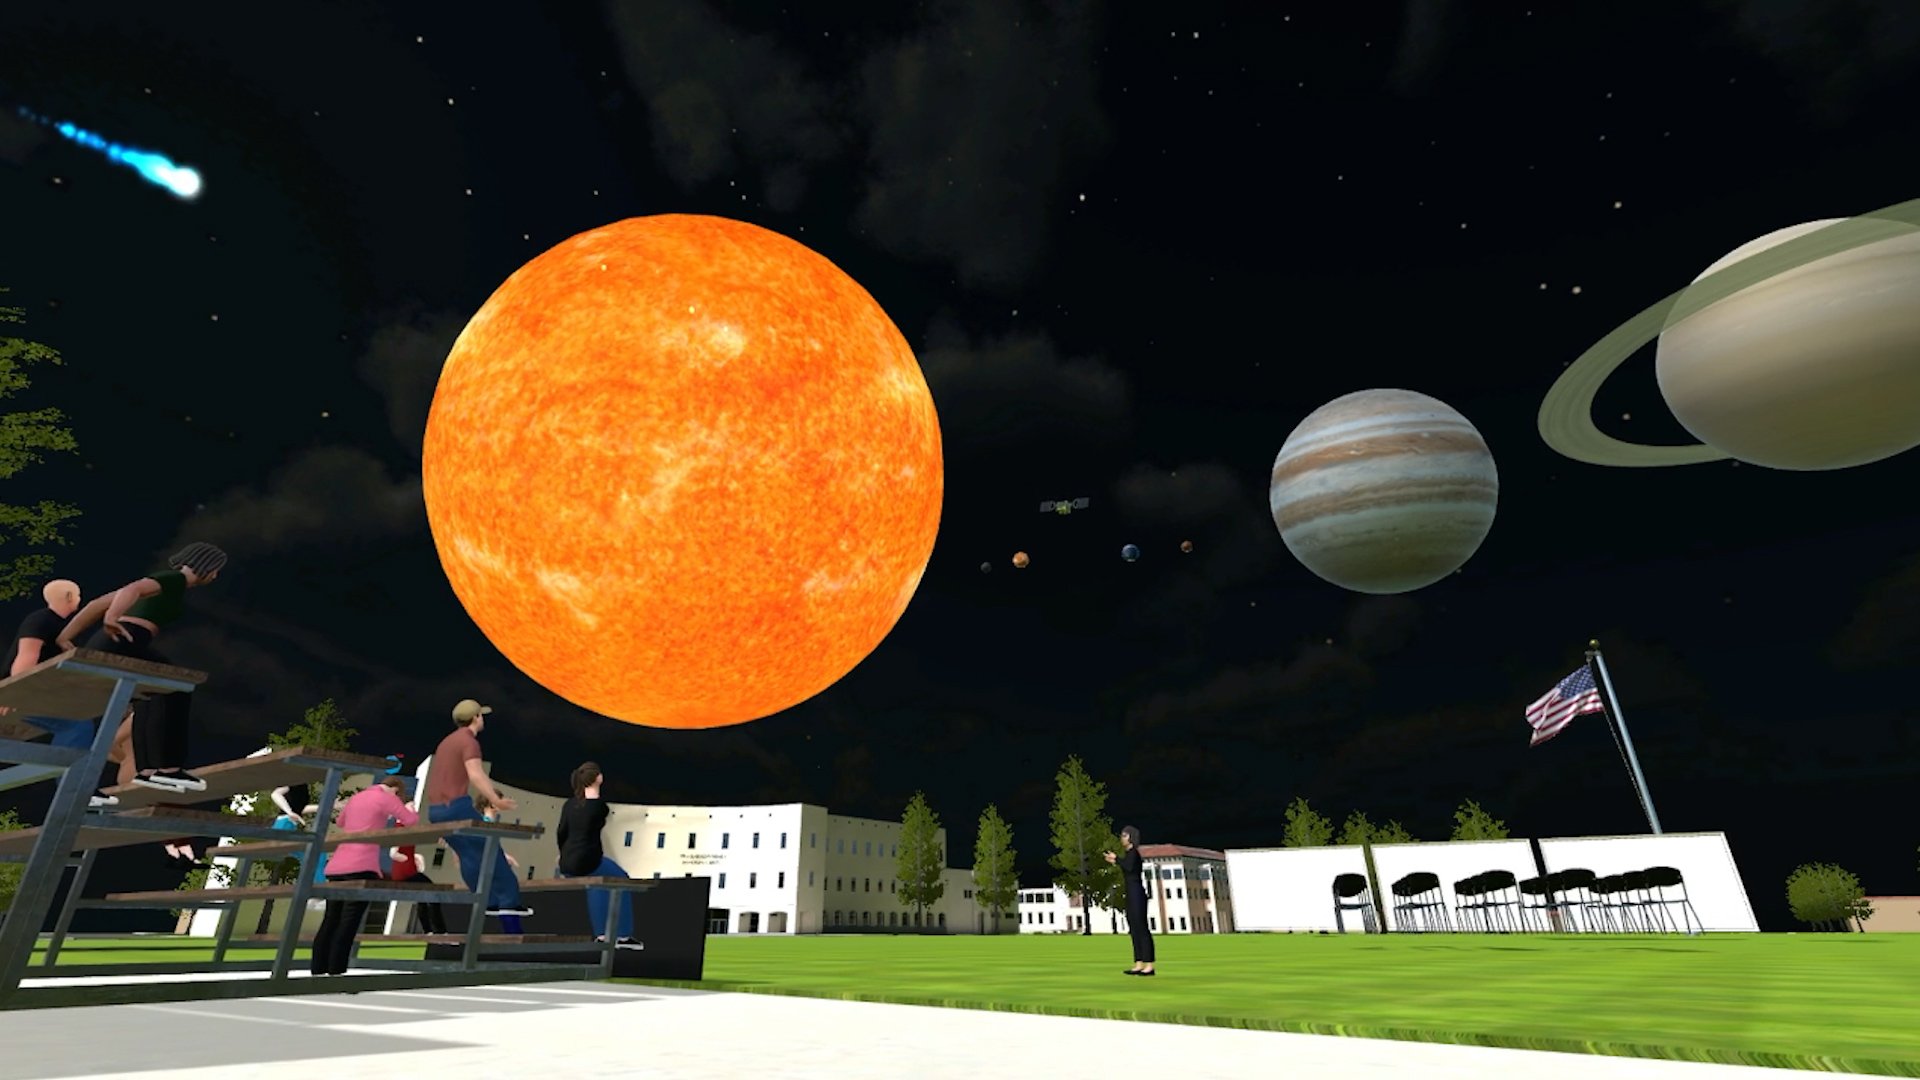 A metaversity allows students to view the planets and sun up close. 